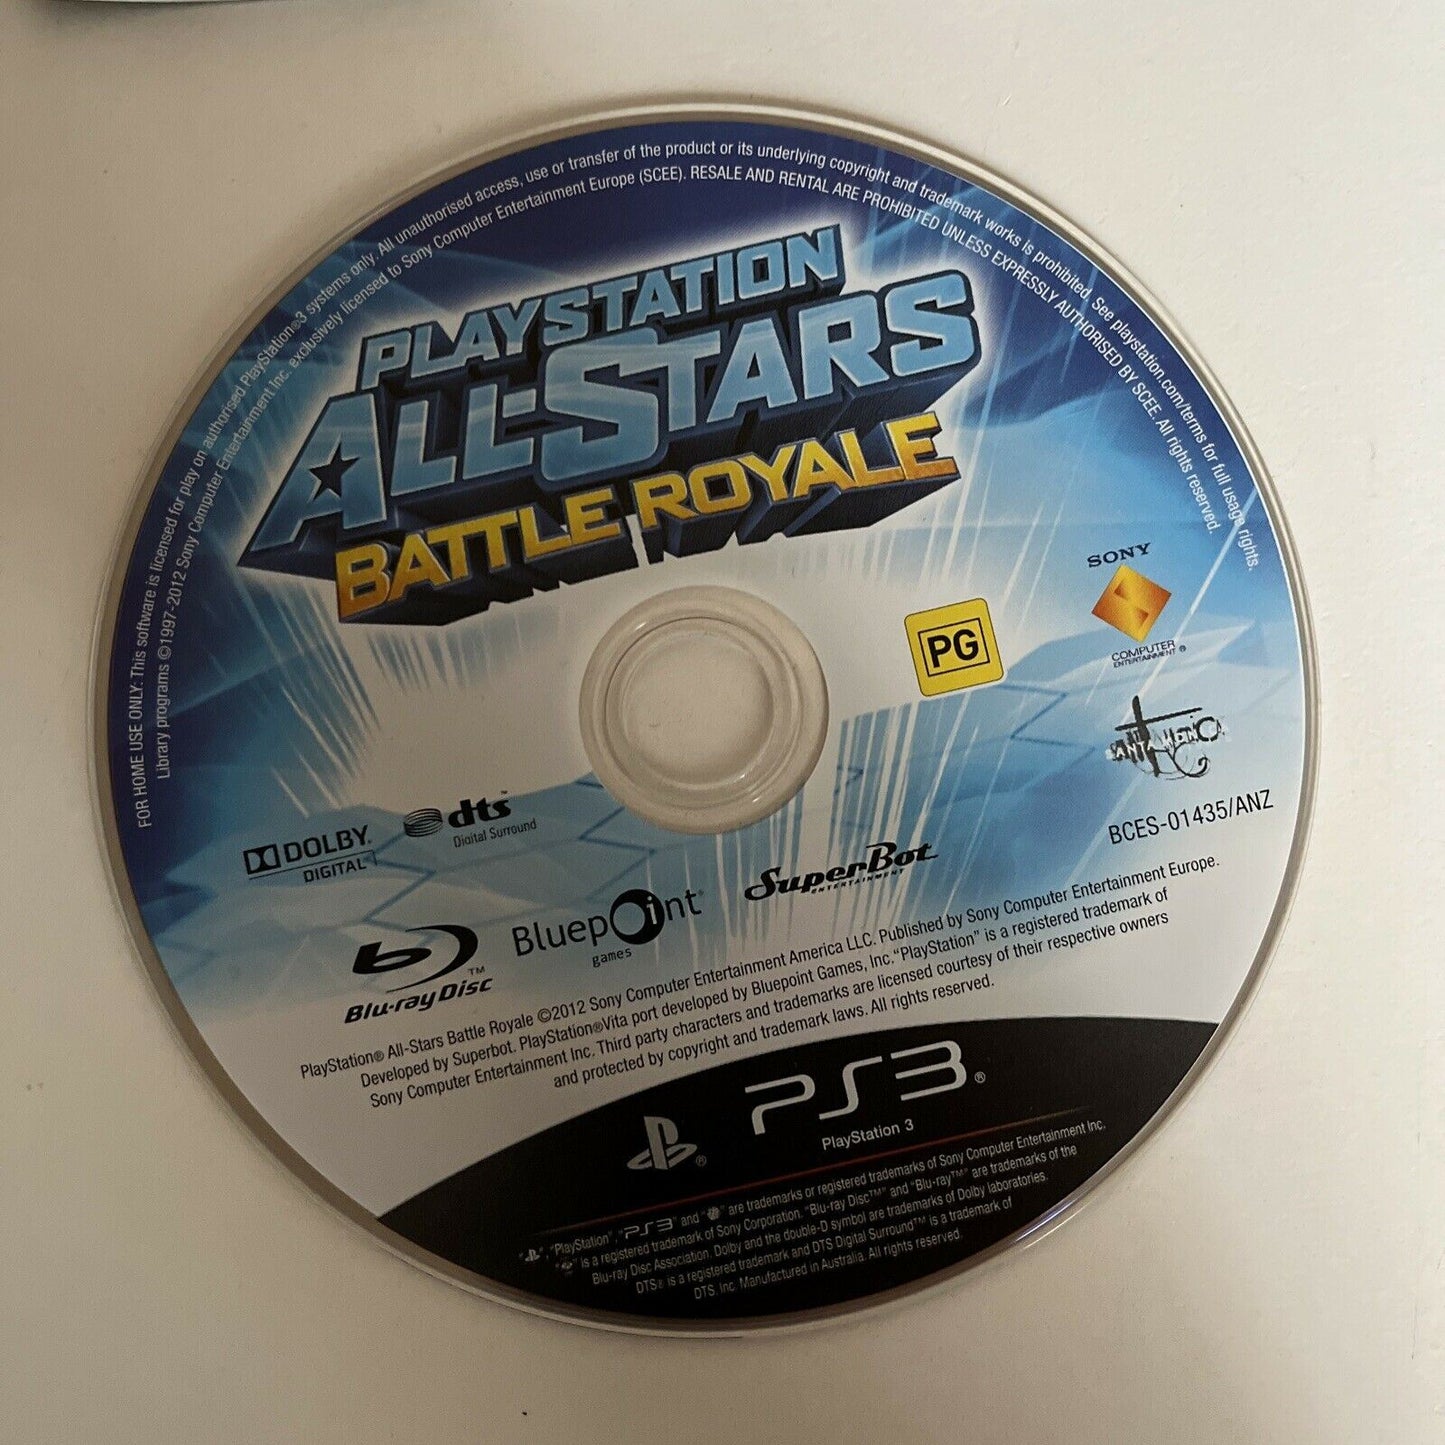 Playstation All-Stars Battle Royal for Playstation 3 PS3